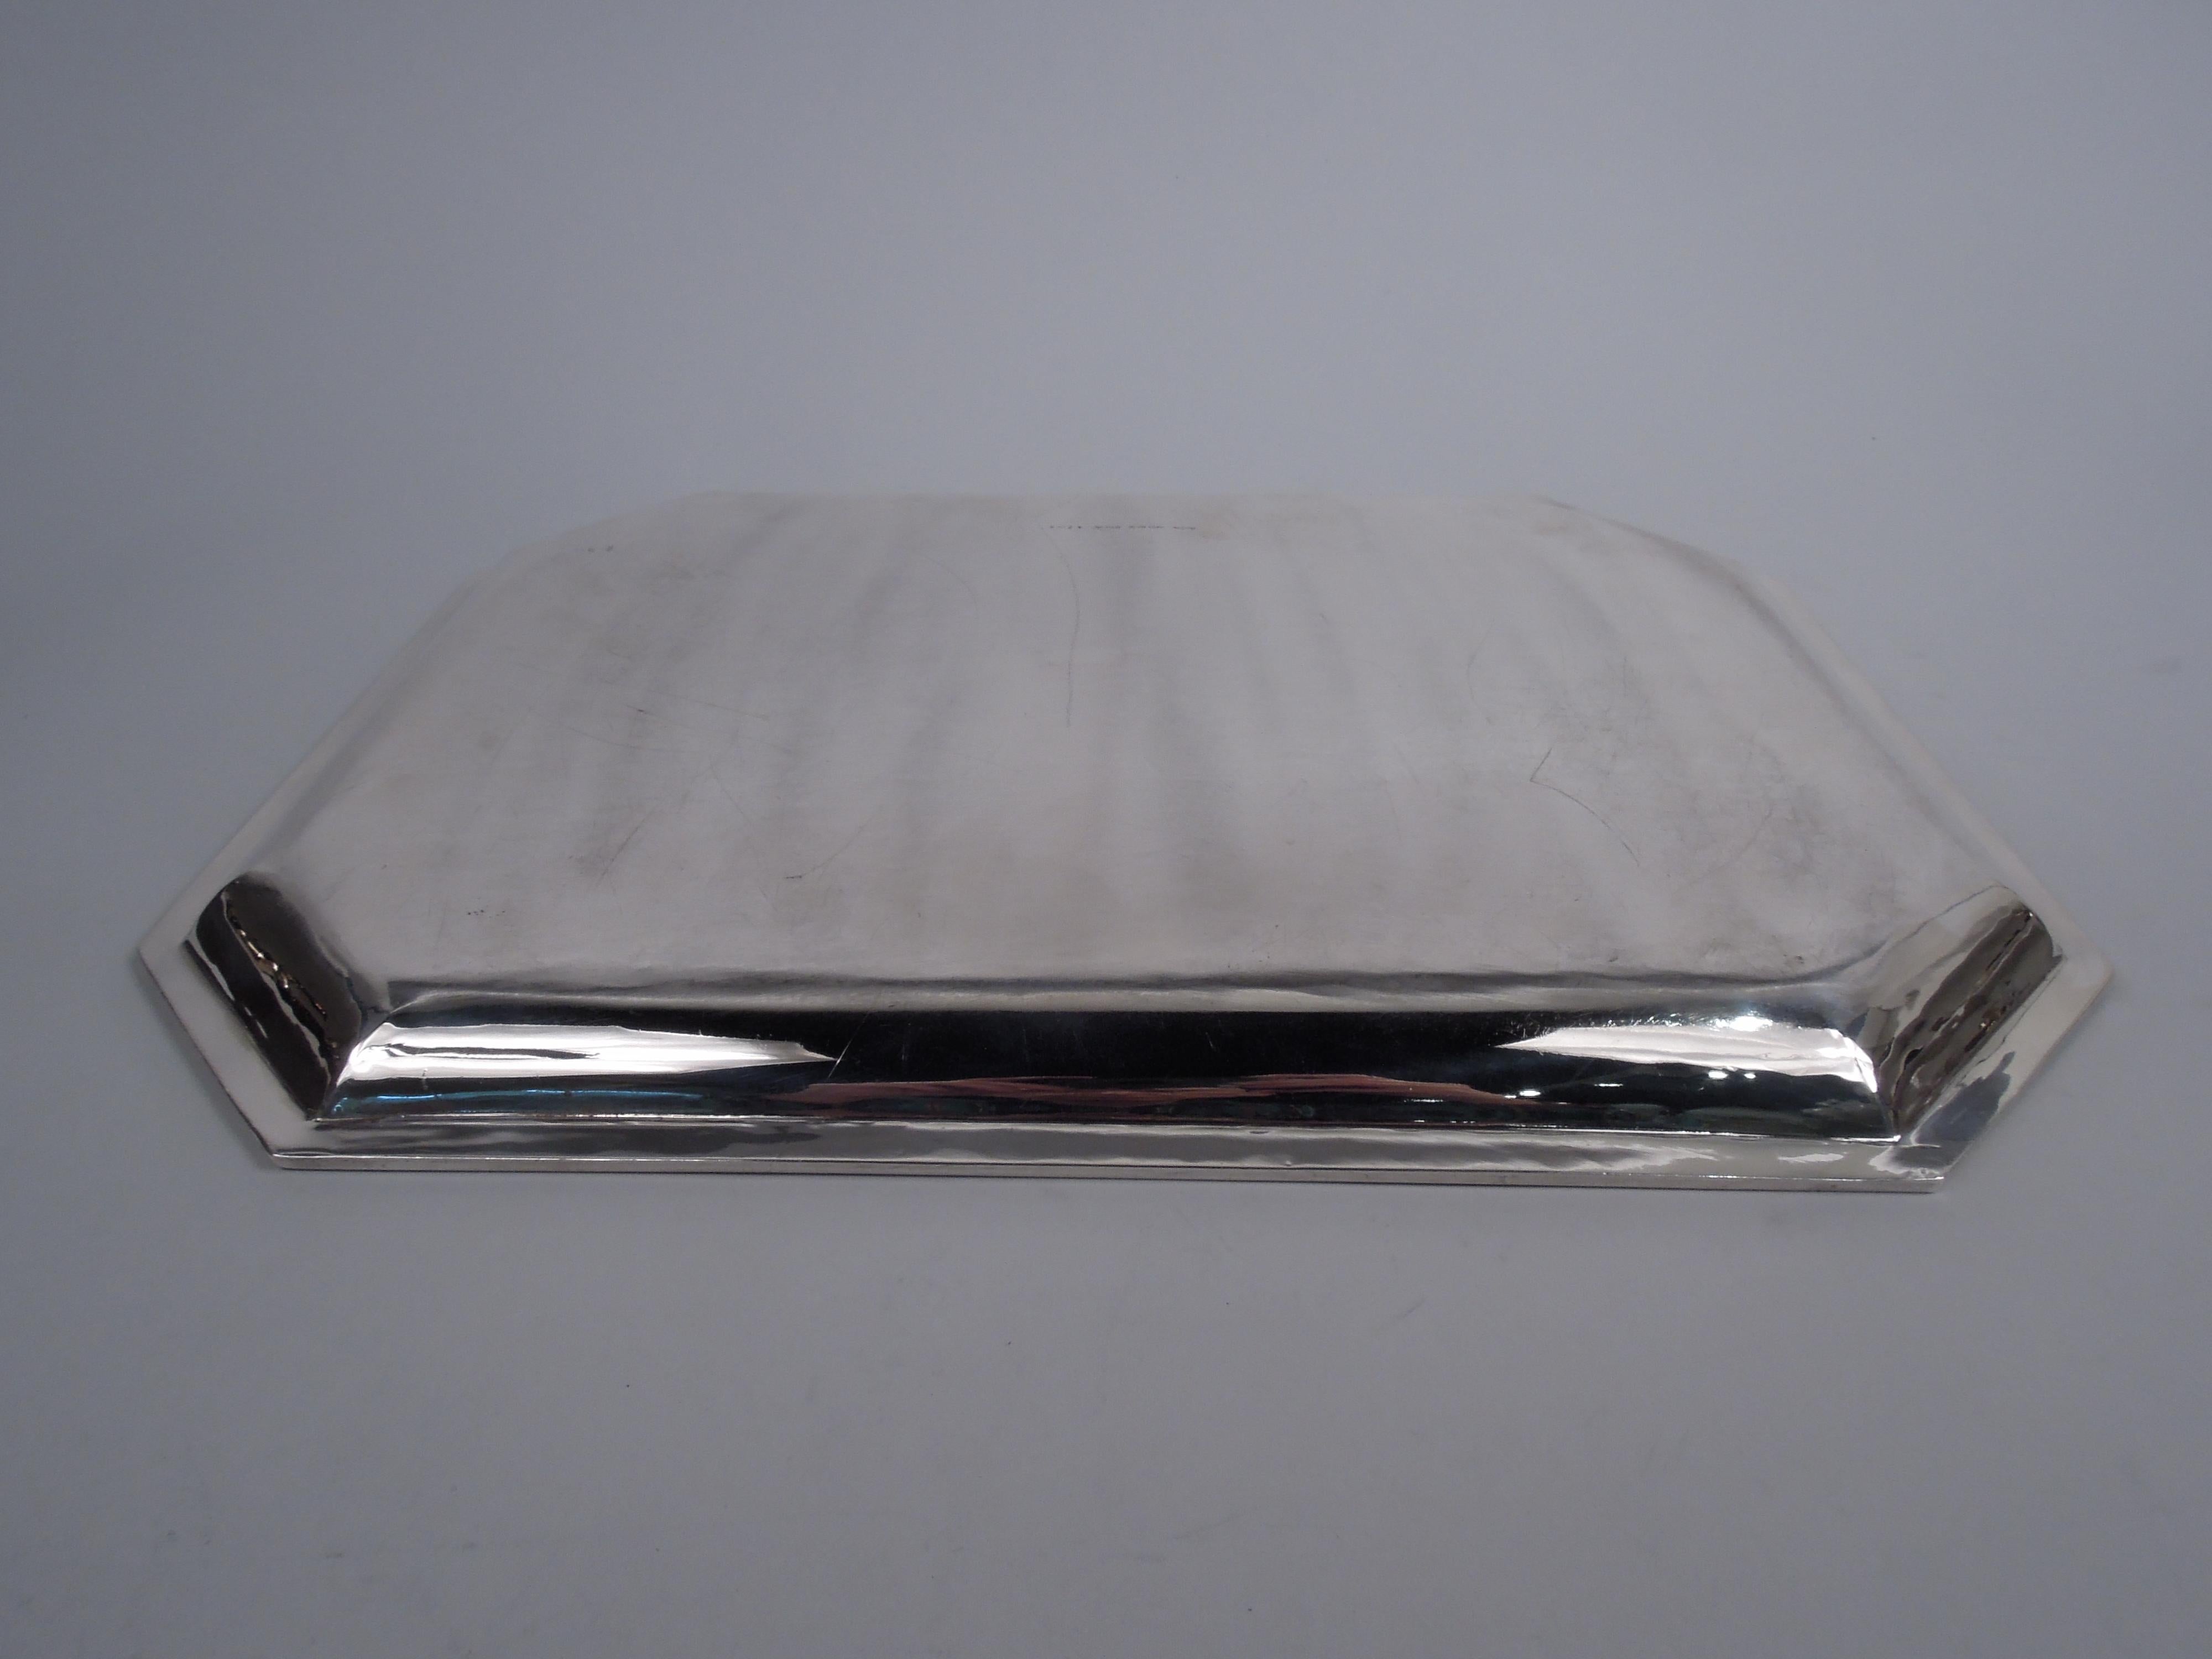 20th Century Cartier American Art Deco Sterling Silver Tray C 1925 For Sale